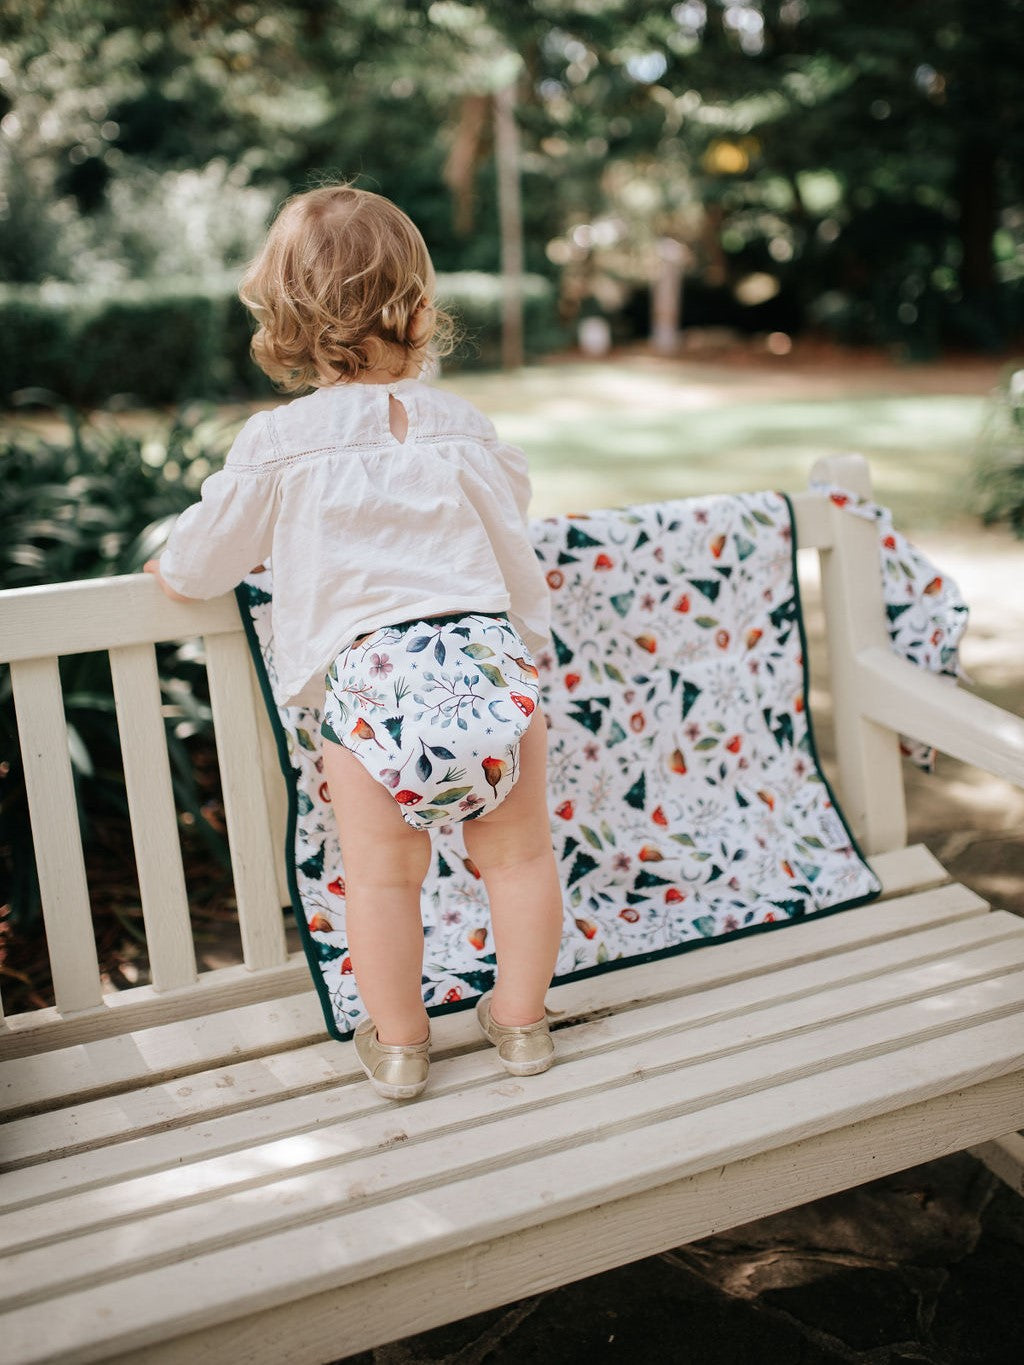 "Winter" Comodo Wrap Nappy Cover | Seedling Baby Modern Cloth Nappies available at Cloth and Carry